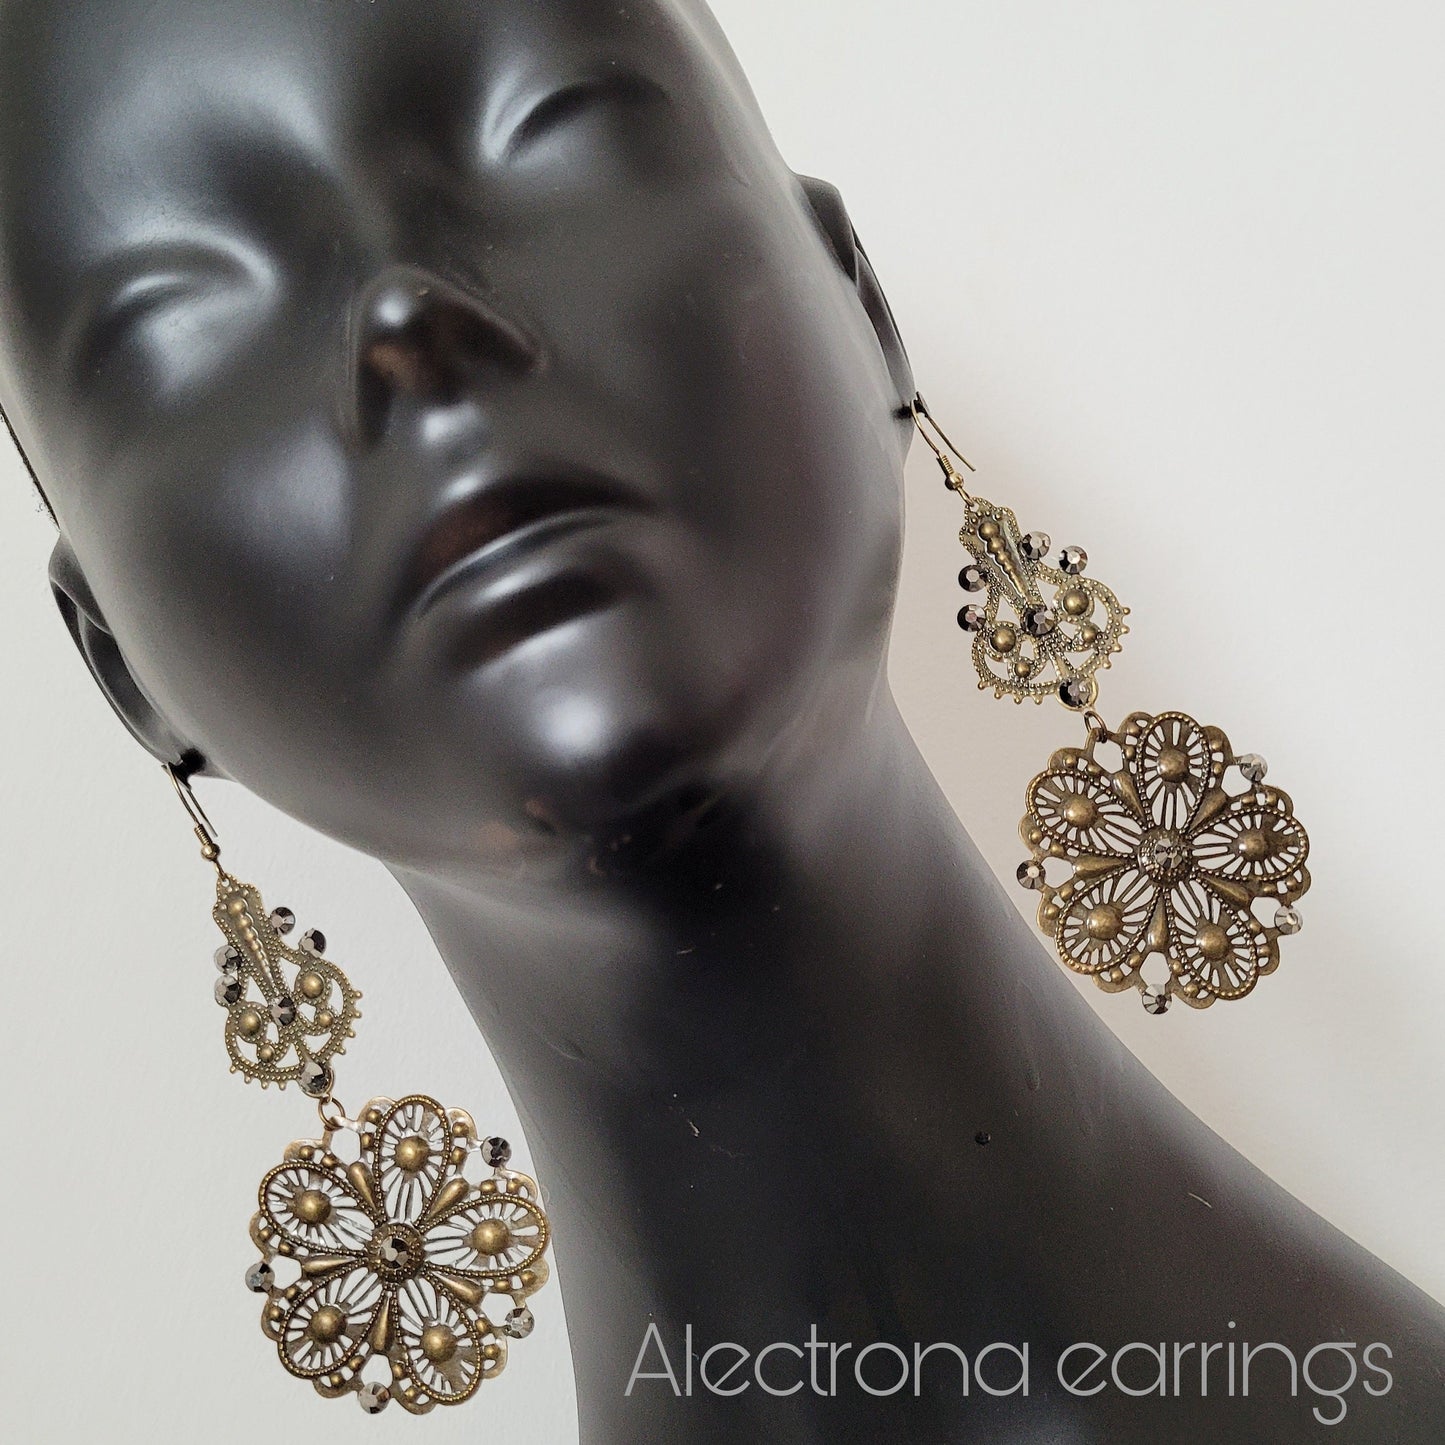 Deusa ex Machina collection: The Alectrona earrings (hook versions)